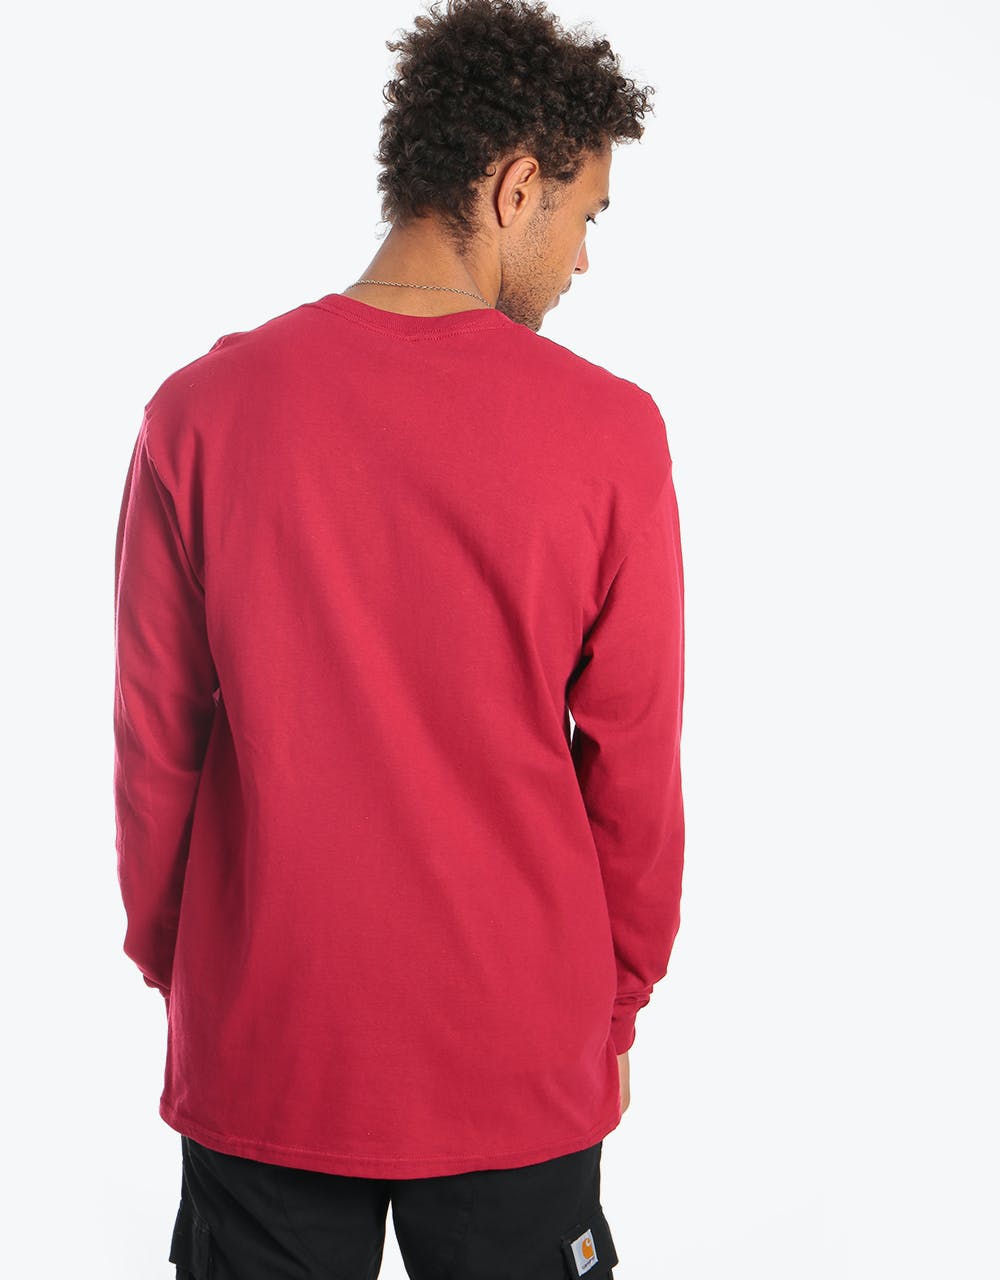 Route One Roses Long Sleeve T-Shirt - Cardinal Red